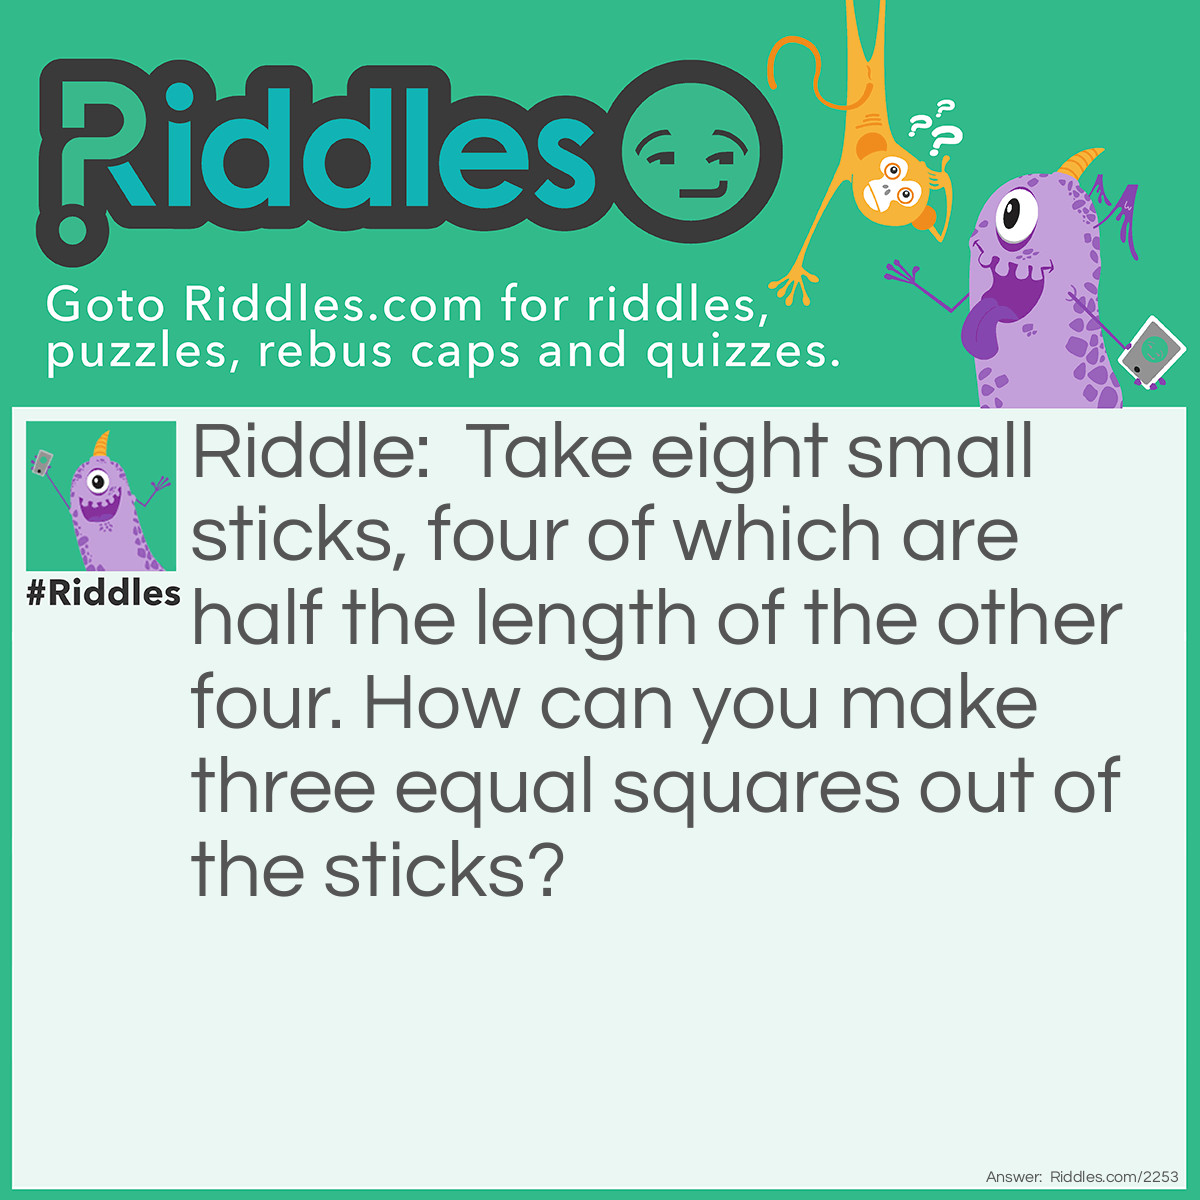 Riddle: Take eight small sticks, four of which are half the length of the other four. How can you make three equal squares out of the sticks? Answer: Use the longer four sticks to be sharing sides between the squares and at the end their should be three intertwined squares.
<img src="../../../uploads/images/8-sticks-3-squares.png" alt="" />